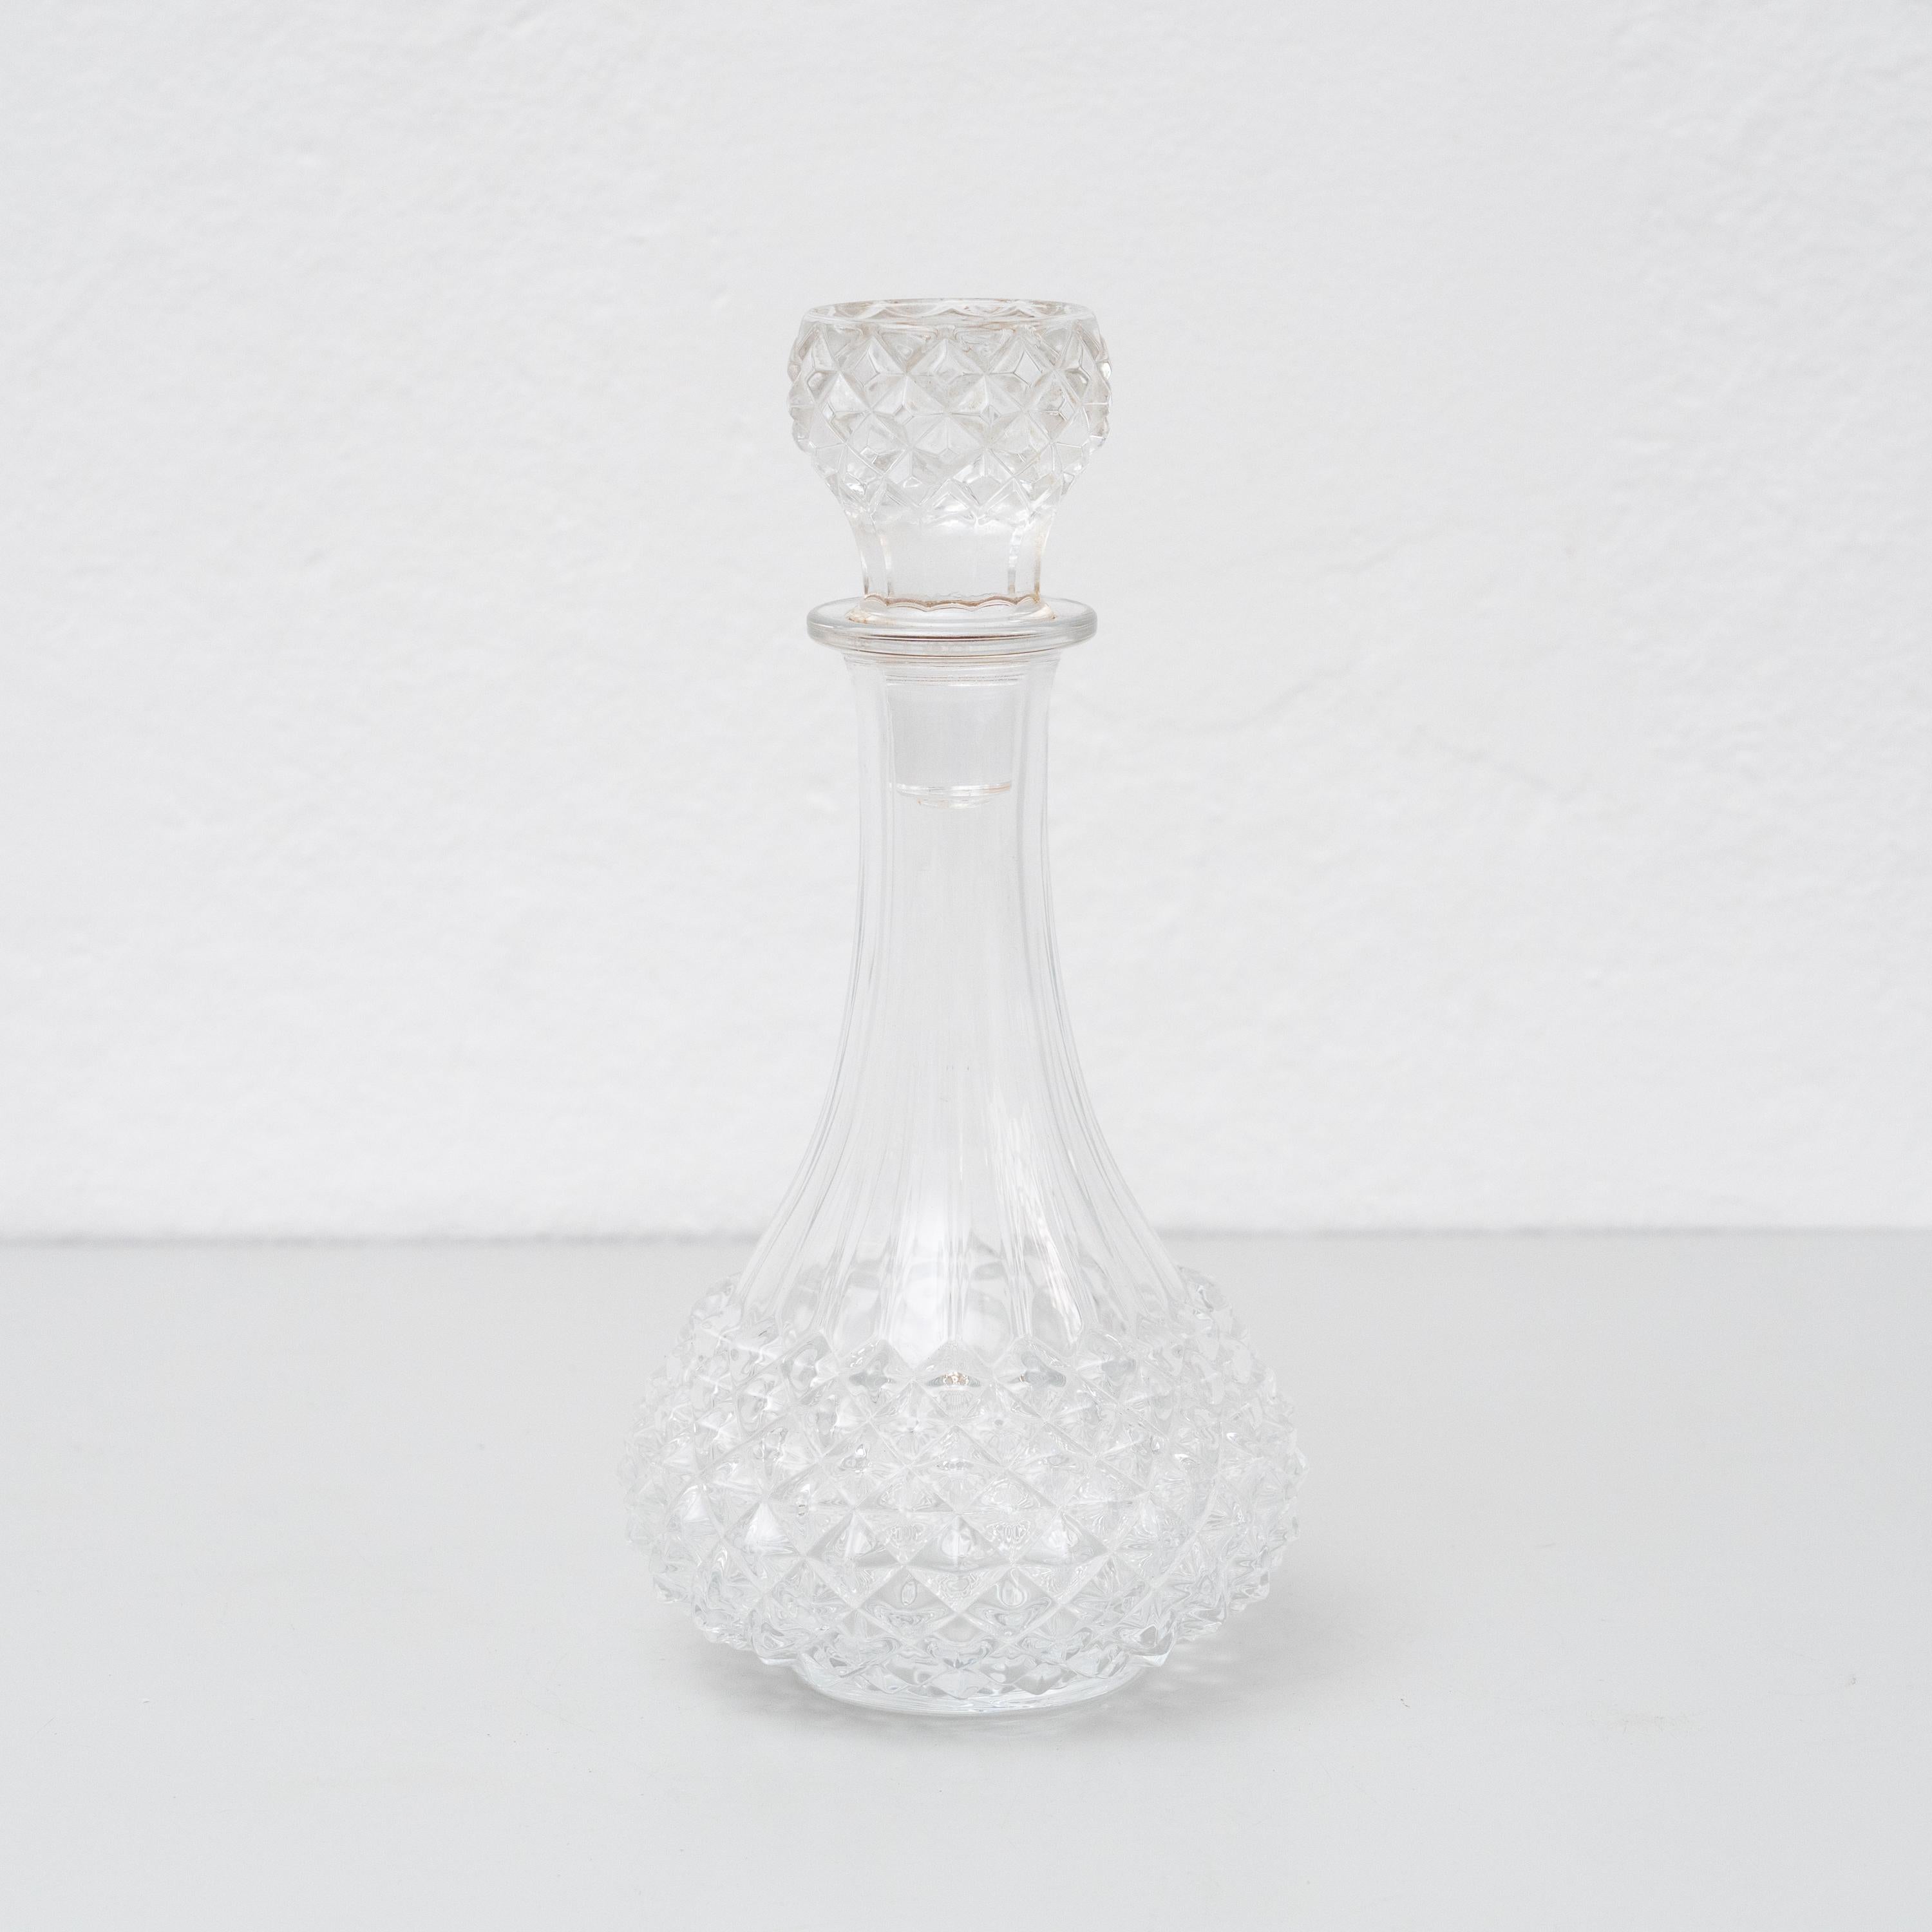 Vintage glass vase with Diamond Capped Style.

Made by unknown manufacturer in Spain, circa 1930.

In original condition, with minor wear consistent with age and use, preserving a beautiful patina.

Materials:
Glass.
 